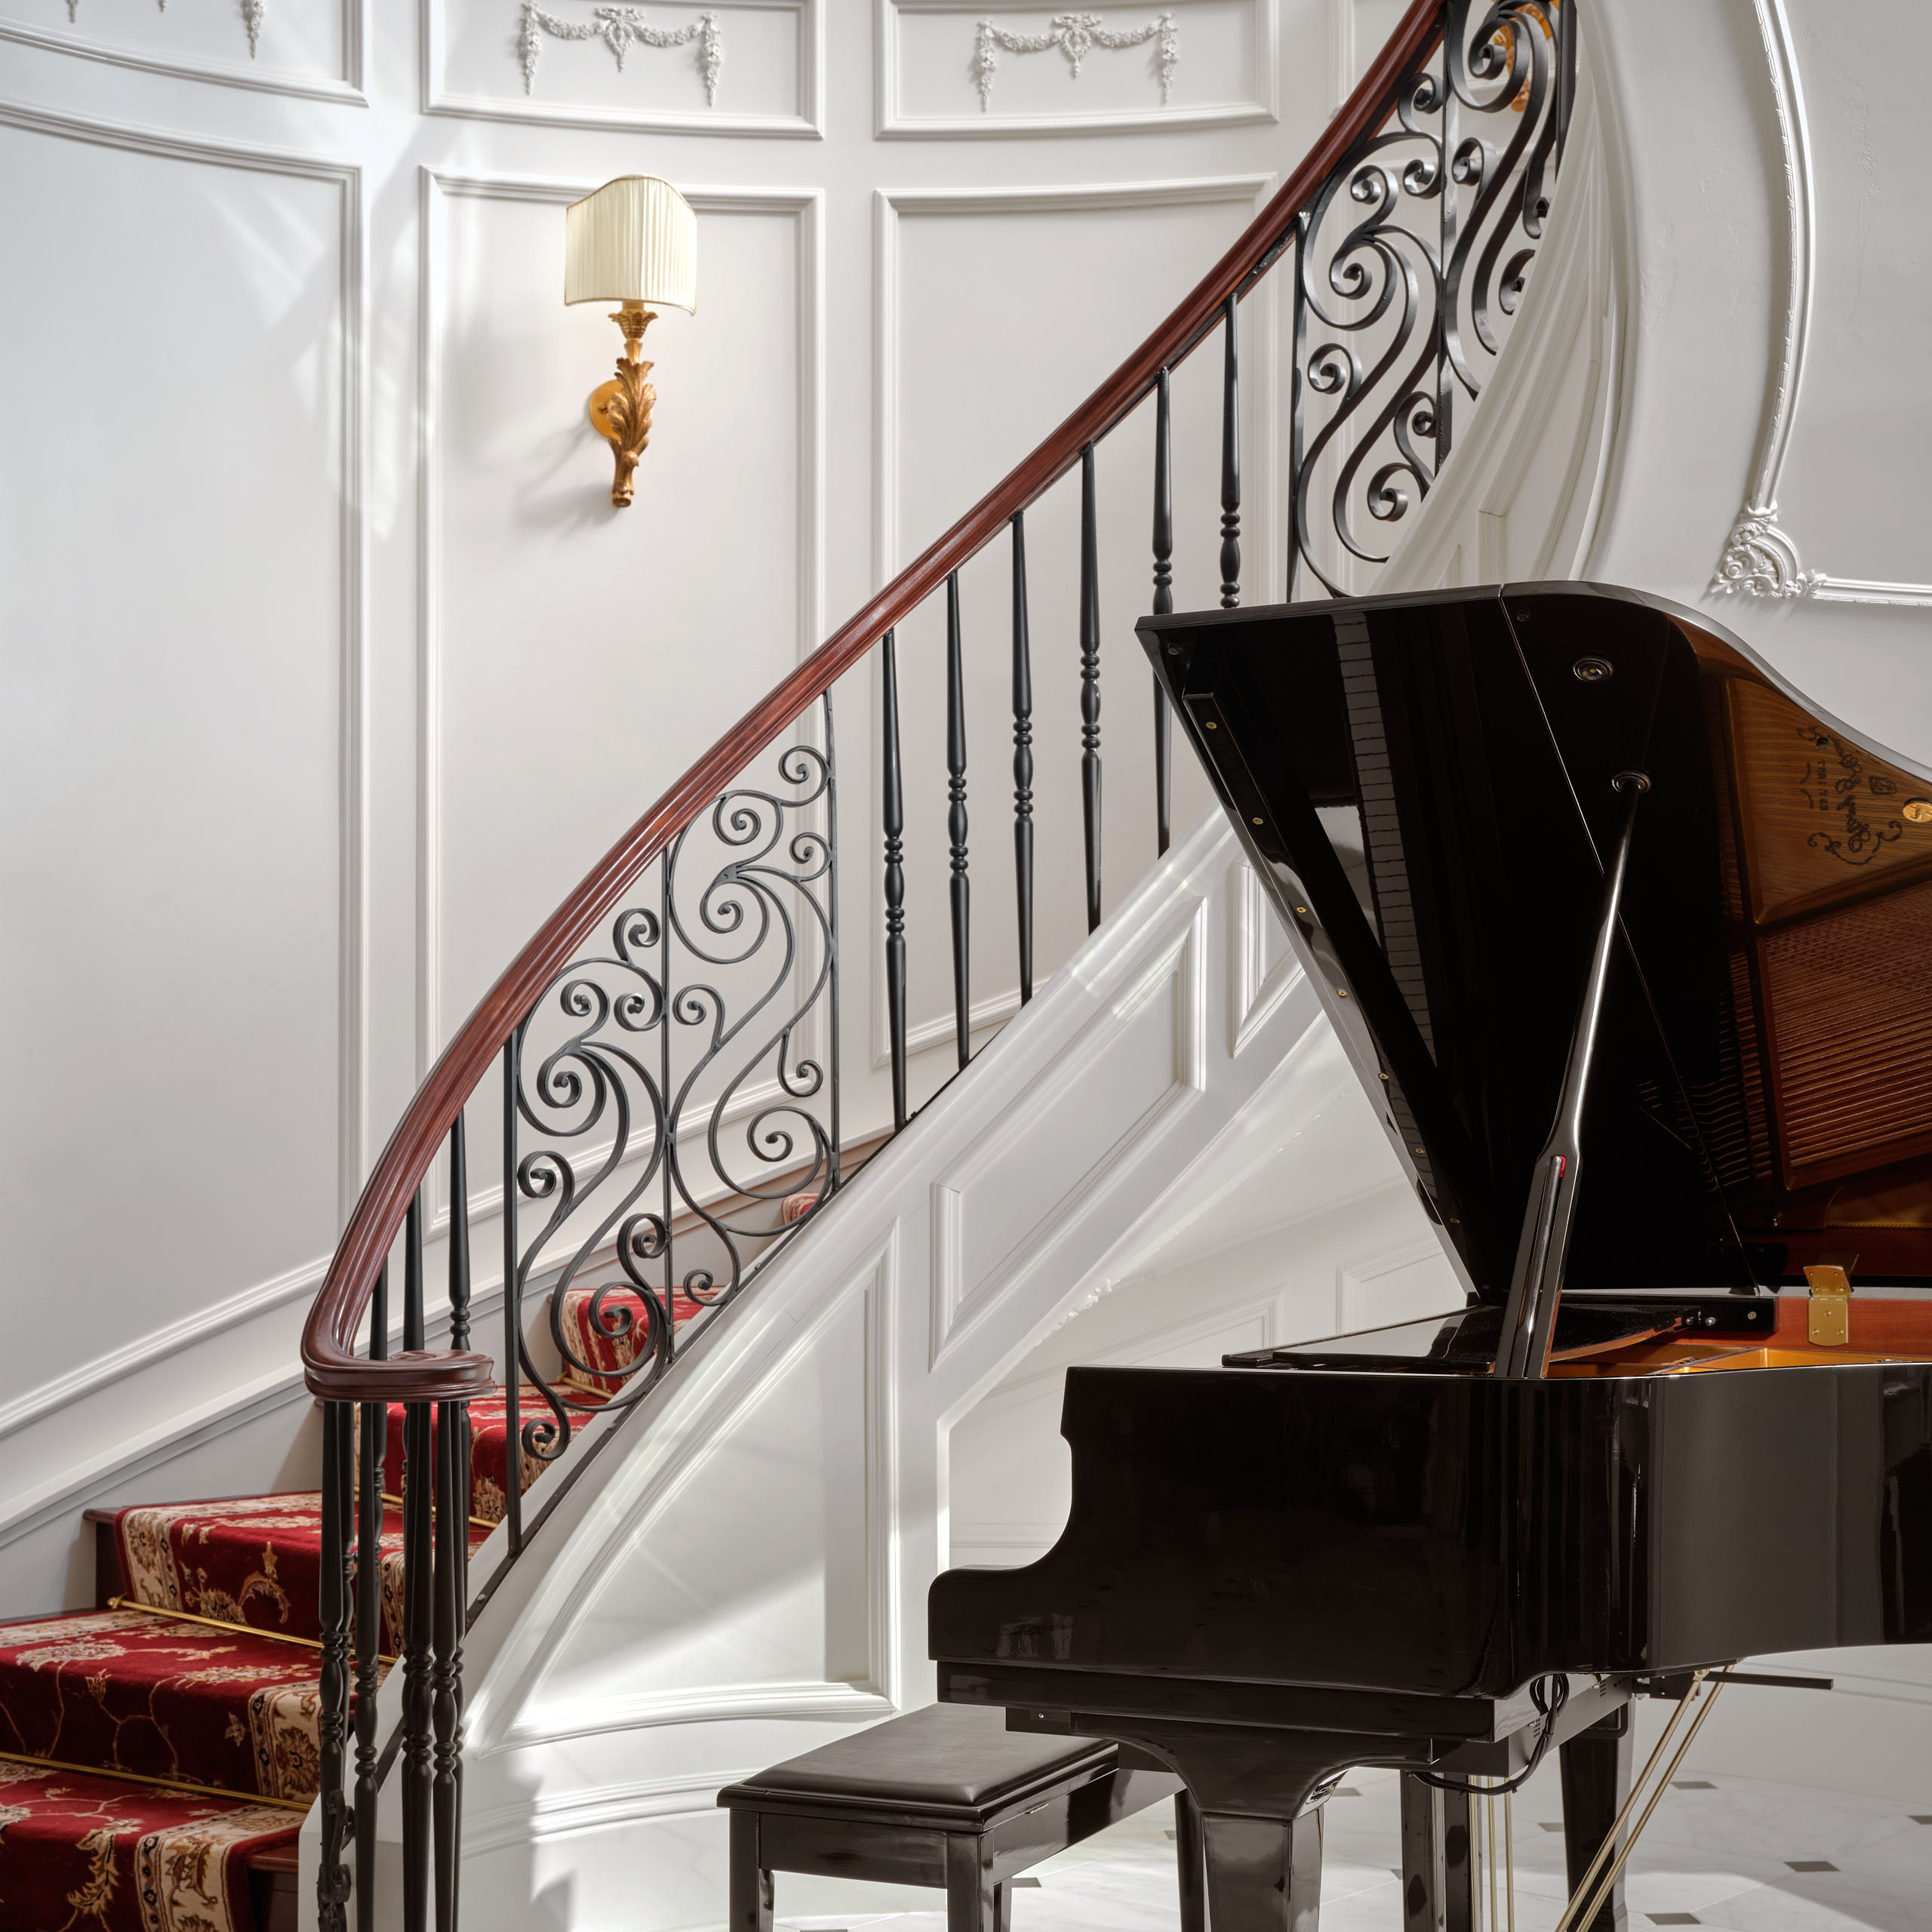 Hospitality photography by Warren Diggles. Stairway and grand piano at HÓZHÓ Scottsdale.